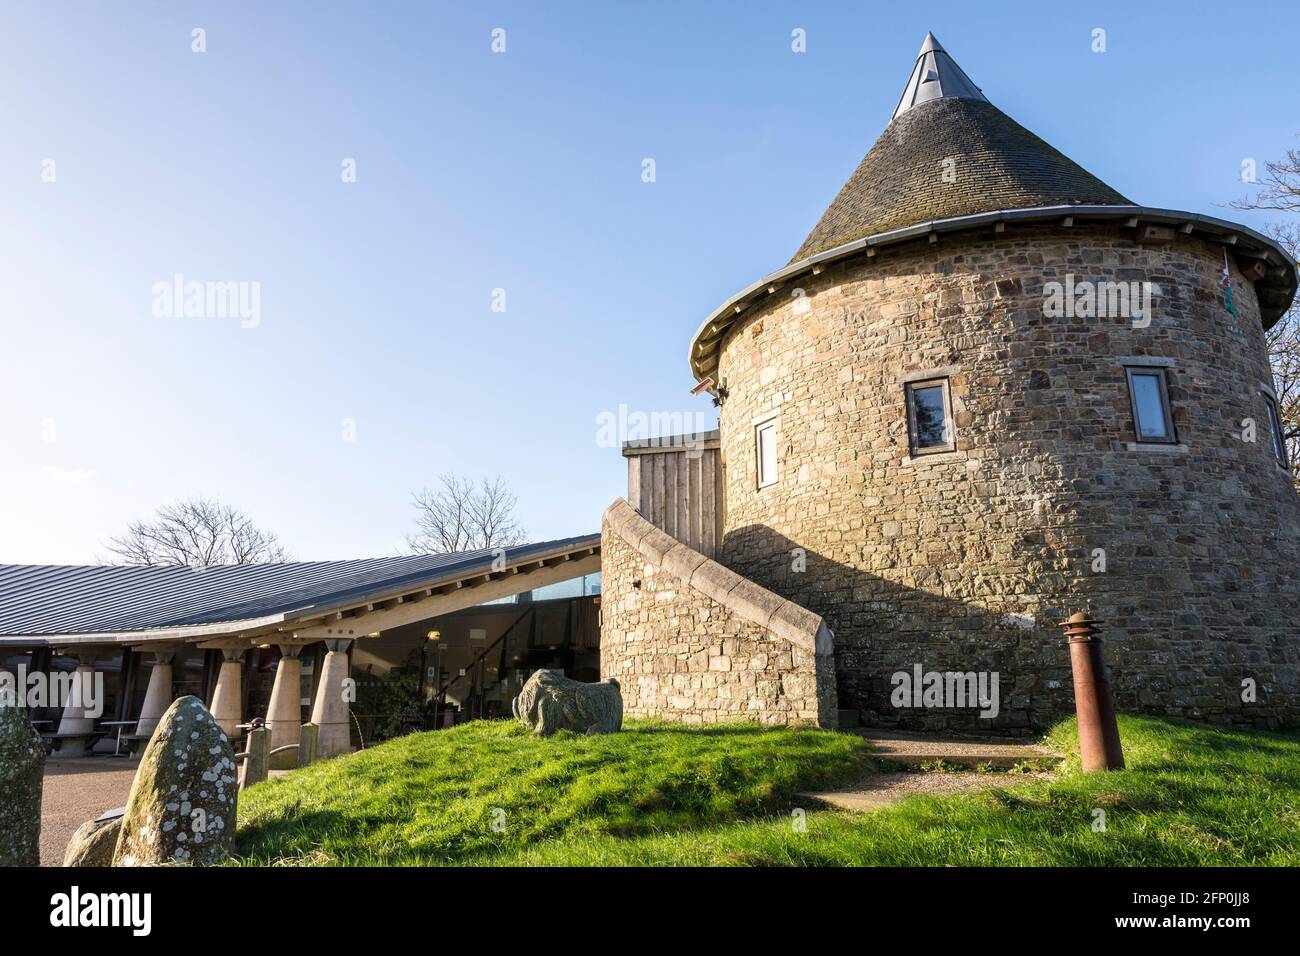 The round tower at Oriel y Parc in St Davids.  It's a bright, sunny, winter morning, the sky is blue and nobody is about. Stock Photo